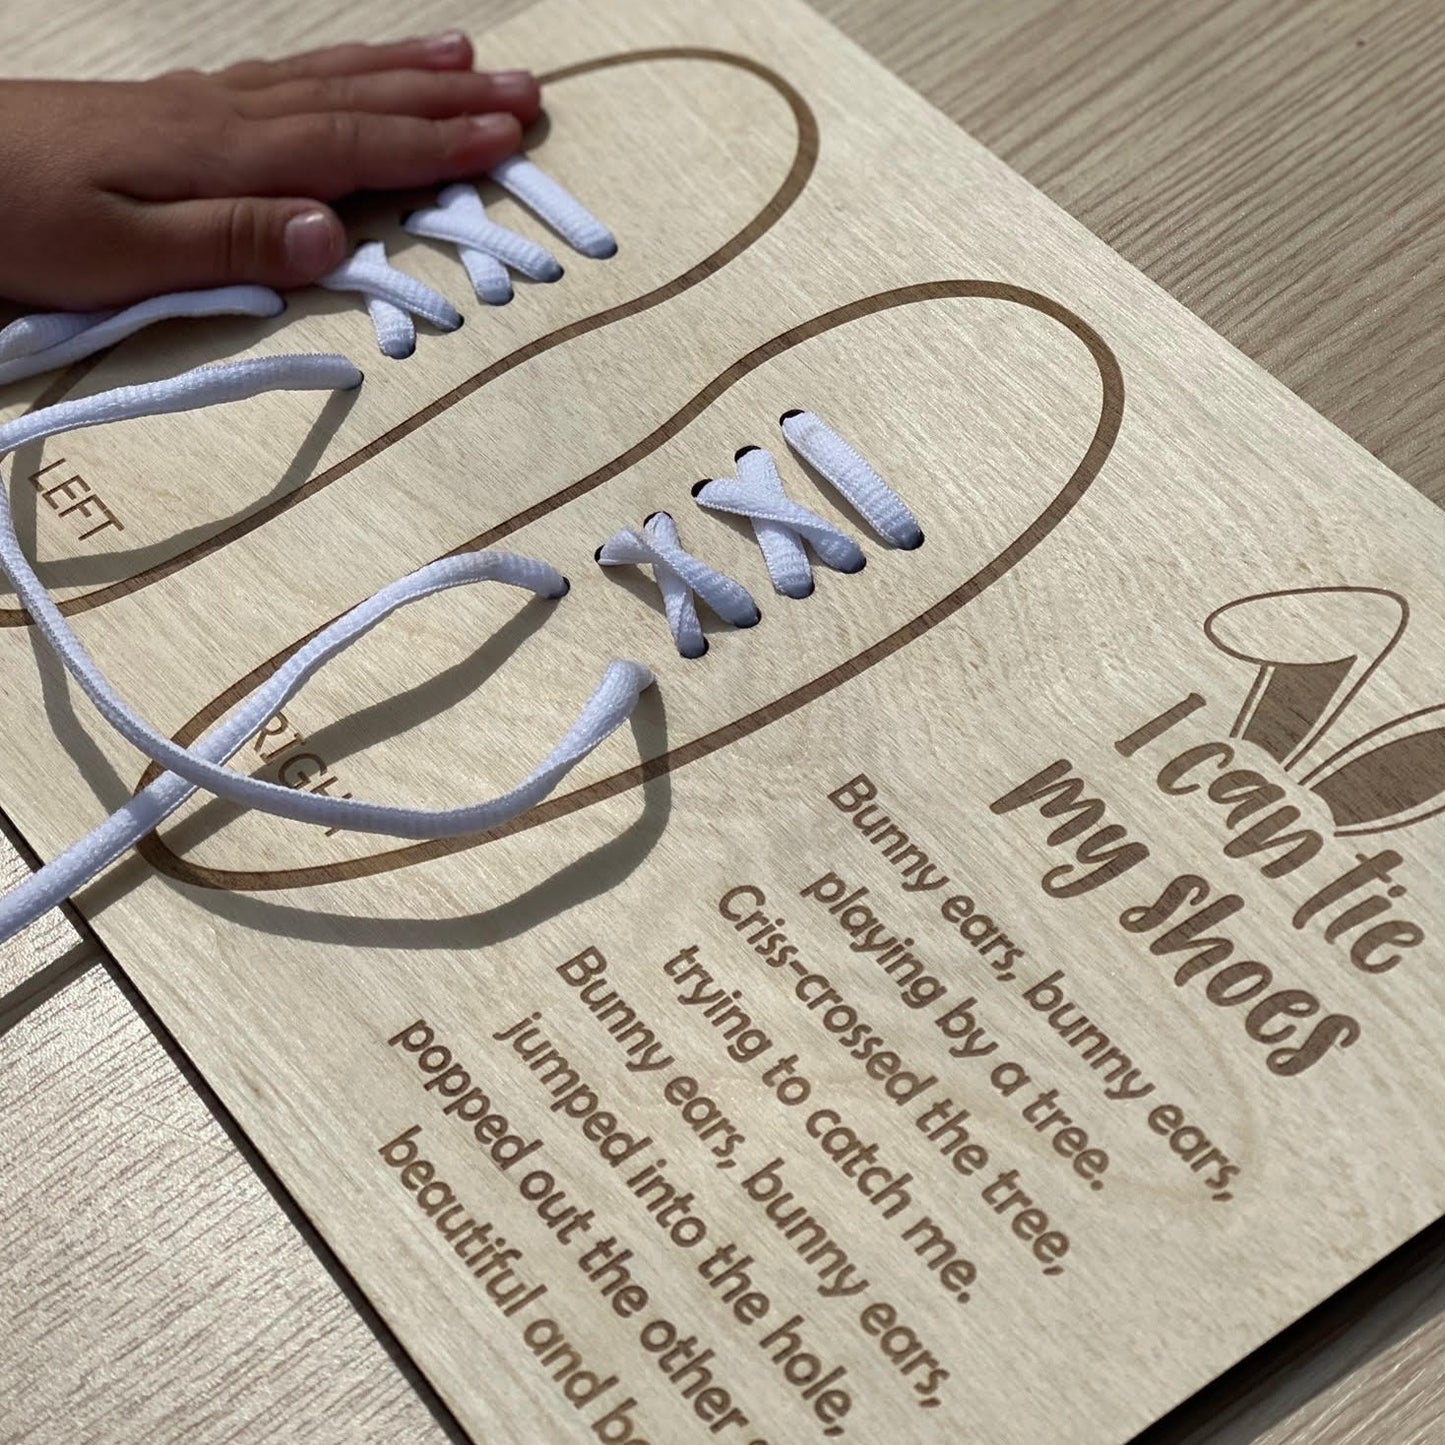 Shoe Lace Practice Board - Learn to tie Shoe Laces